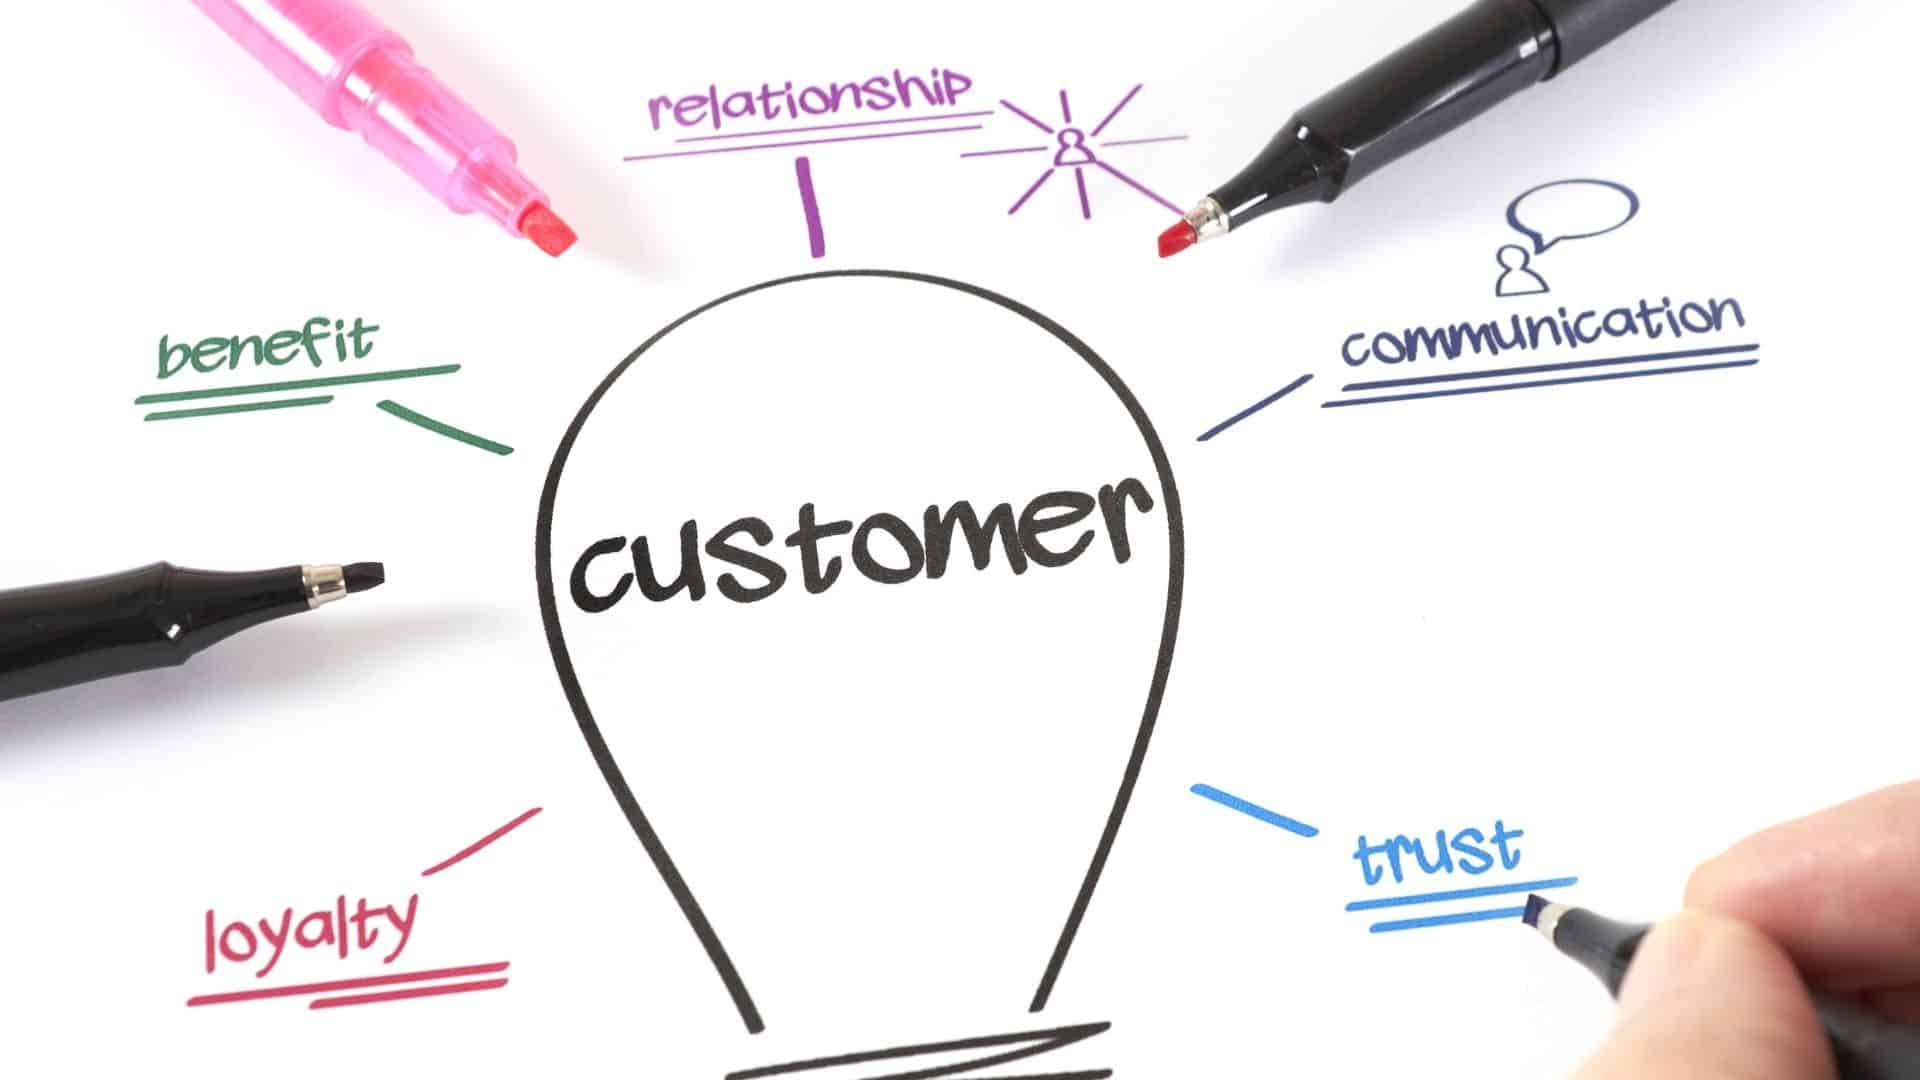 stock image showing a light bulb with the word "customer" in the middle, surrounded by ways of connecting with customers